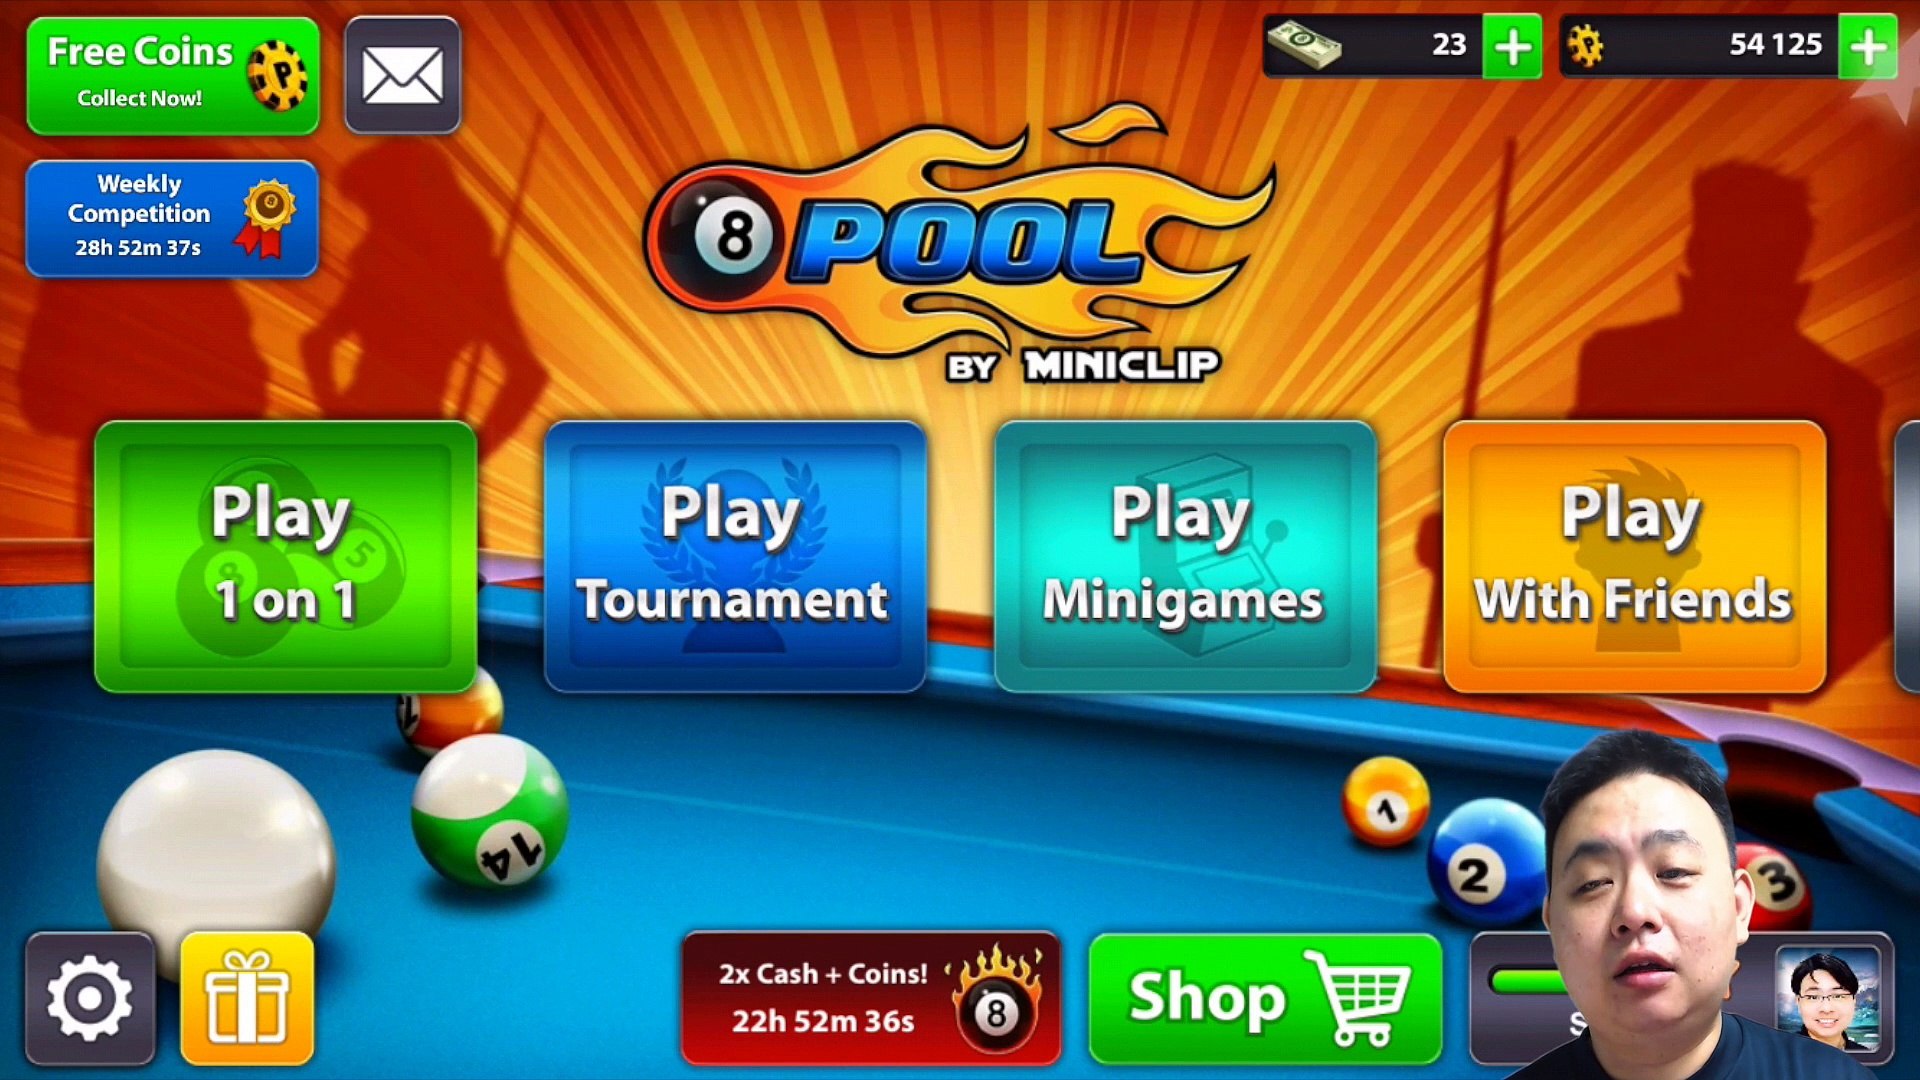 What happened to miniclip 8 ball pool?